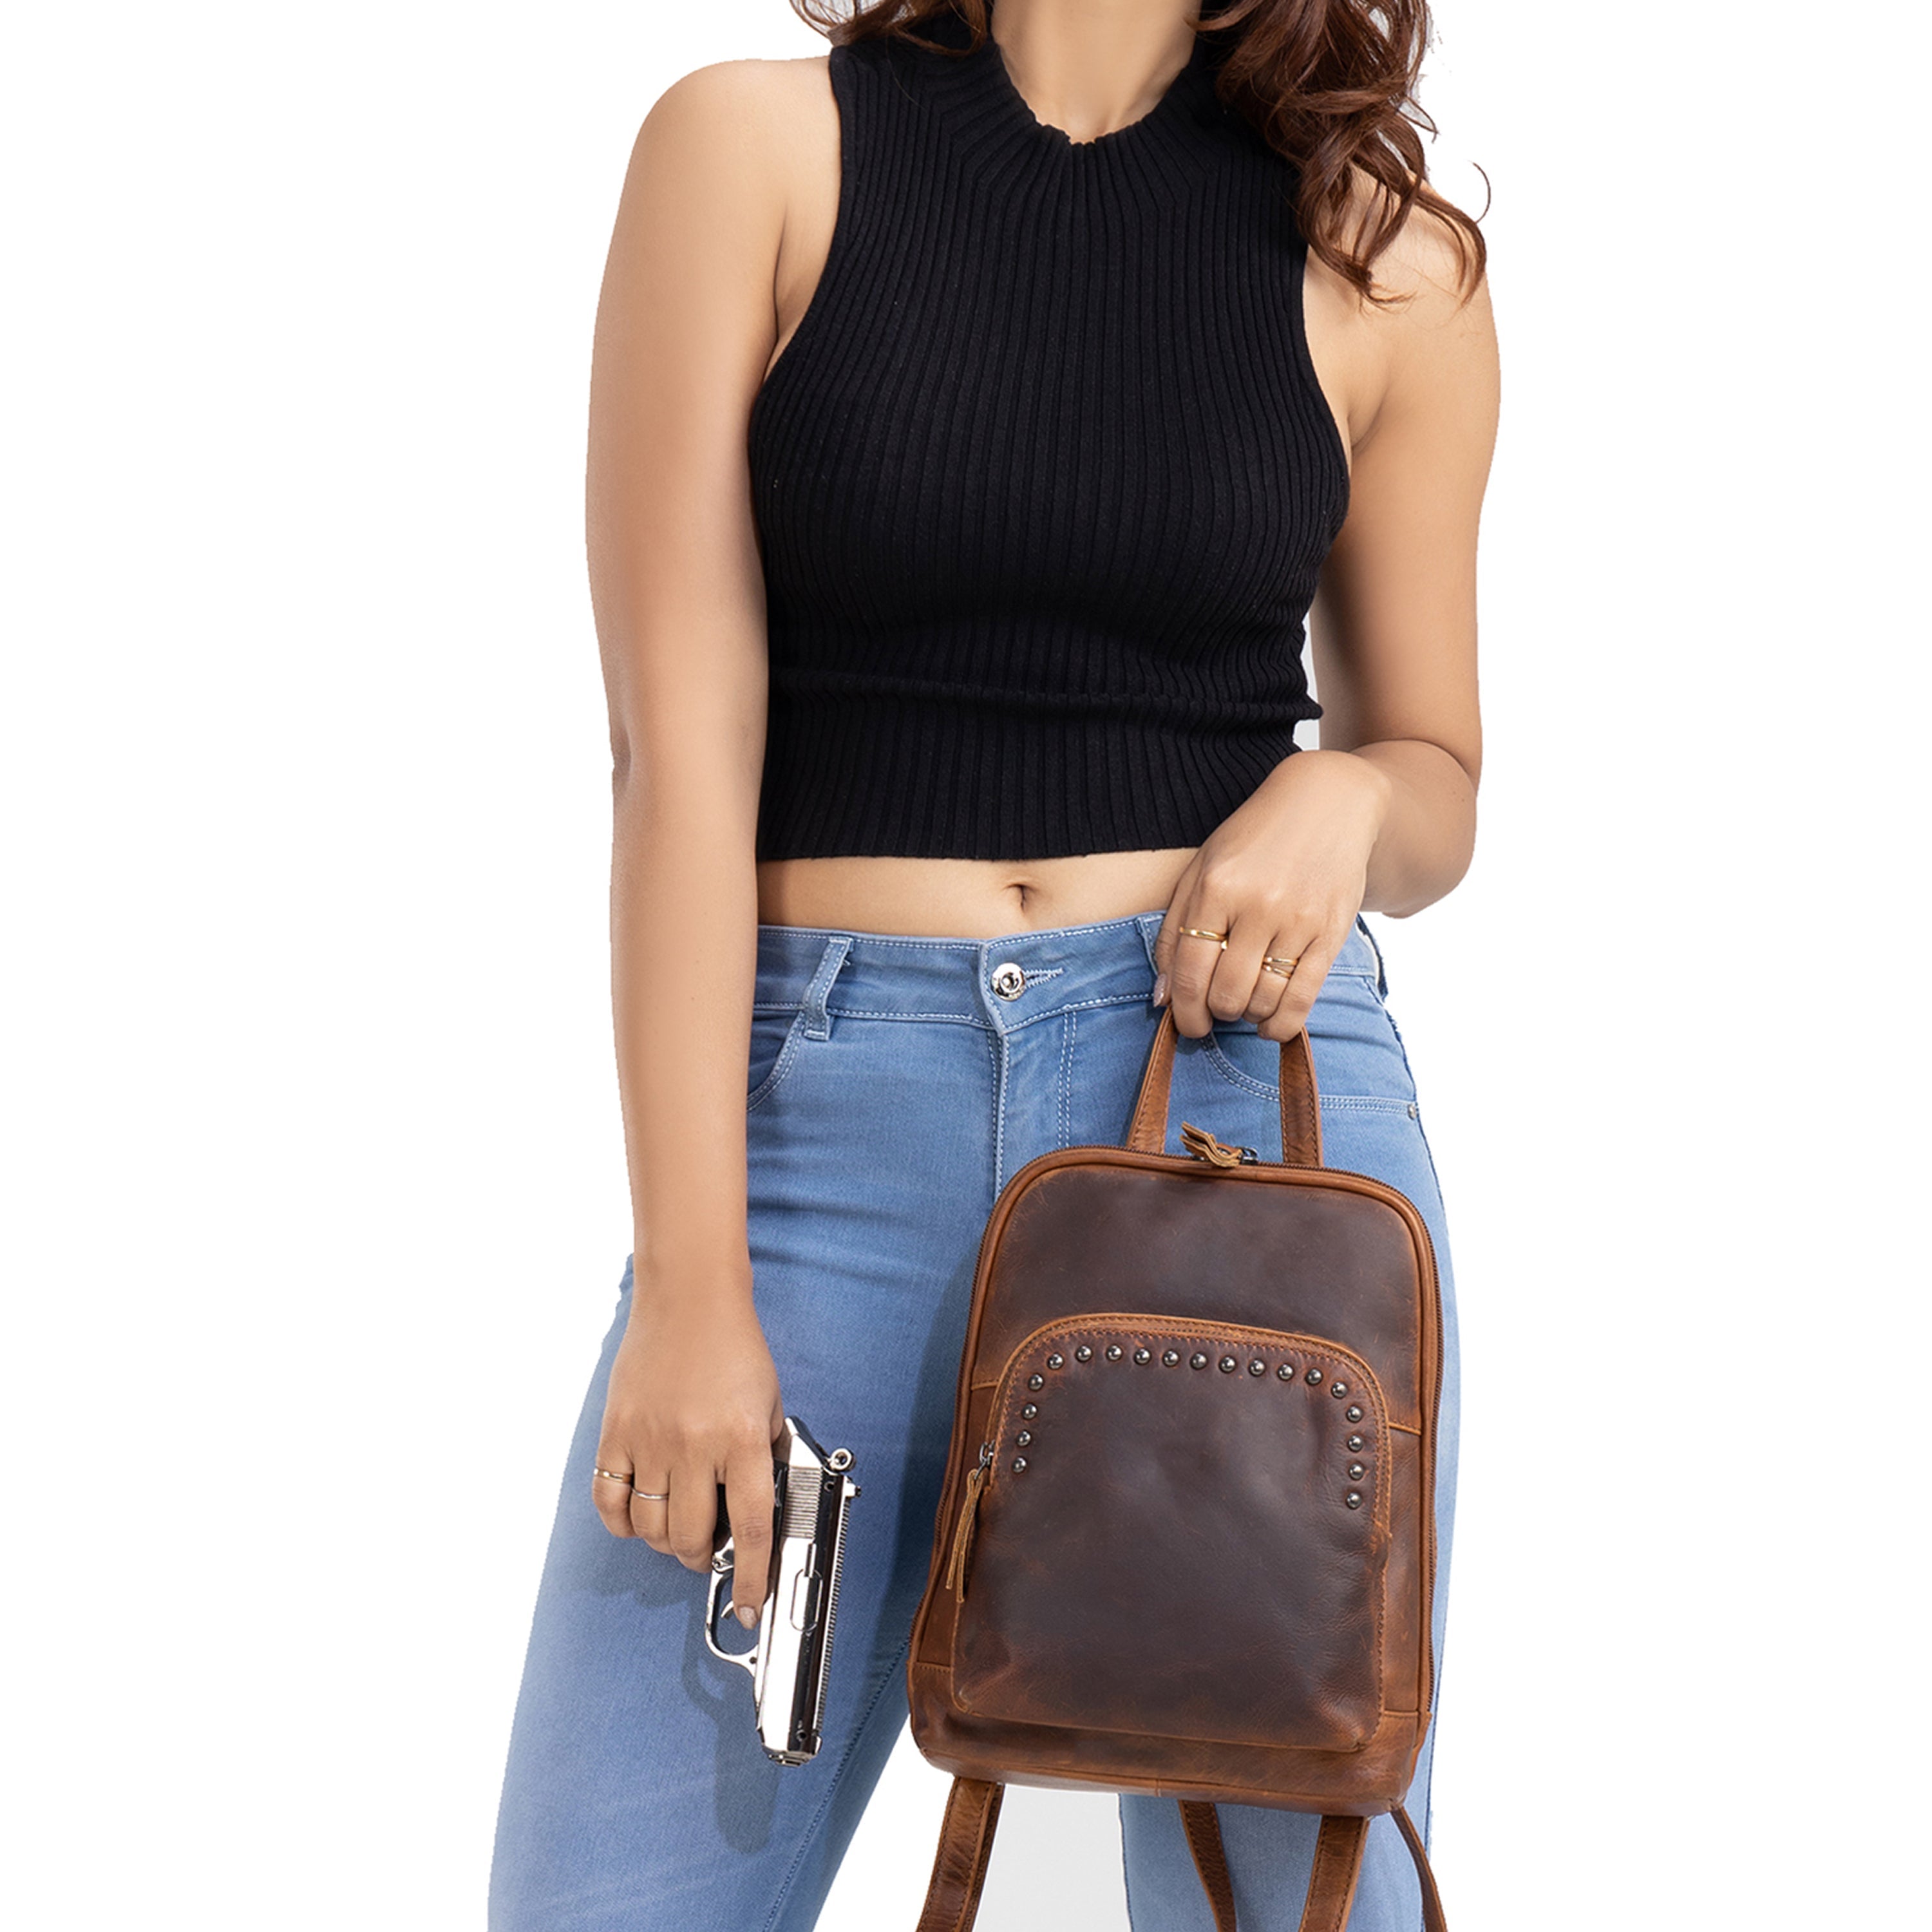 Concealed Carry Abby Leather Cognac Concealed Carry Backpack - Lady Conceal - Women conceal carry backpack for pistol - Designer Abbie Brown Carry Backpack - YKK Locking Zippers and Universal Holster - Unique Hide Backpack Gun and Pistol Bag - Designer Luxury Abby Leather Carry Handbag Backpack - carry backpack for gun carry - Unique Abbie Backpack for gun - concealed carry gun Handbag - concealed carry gun Backpack with locking zipper - concealed carry Backpack for woman